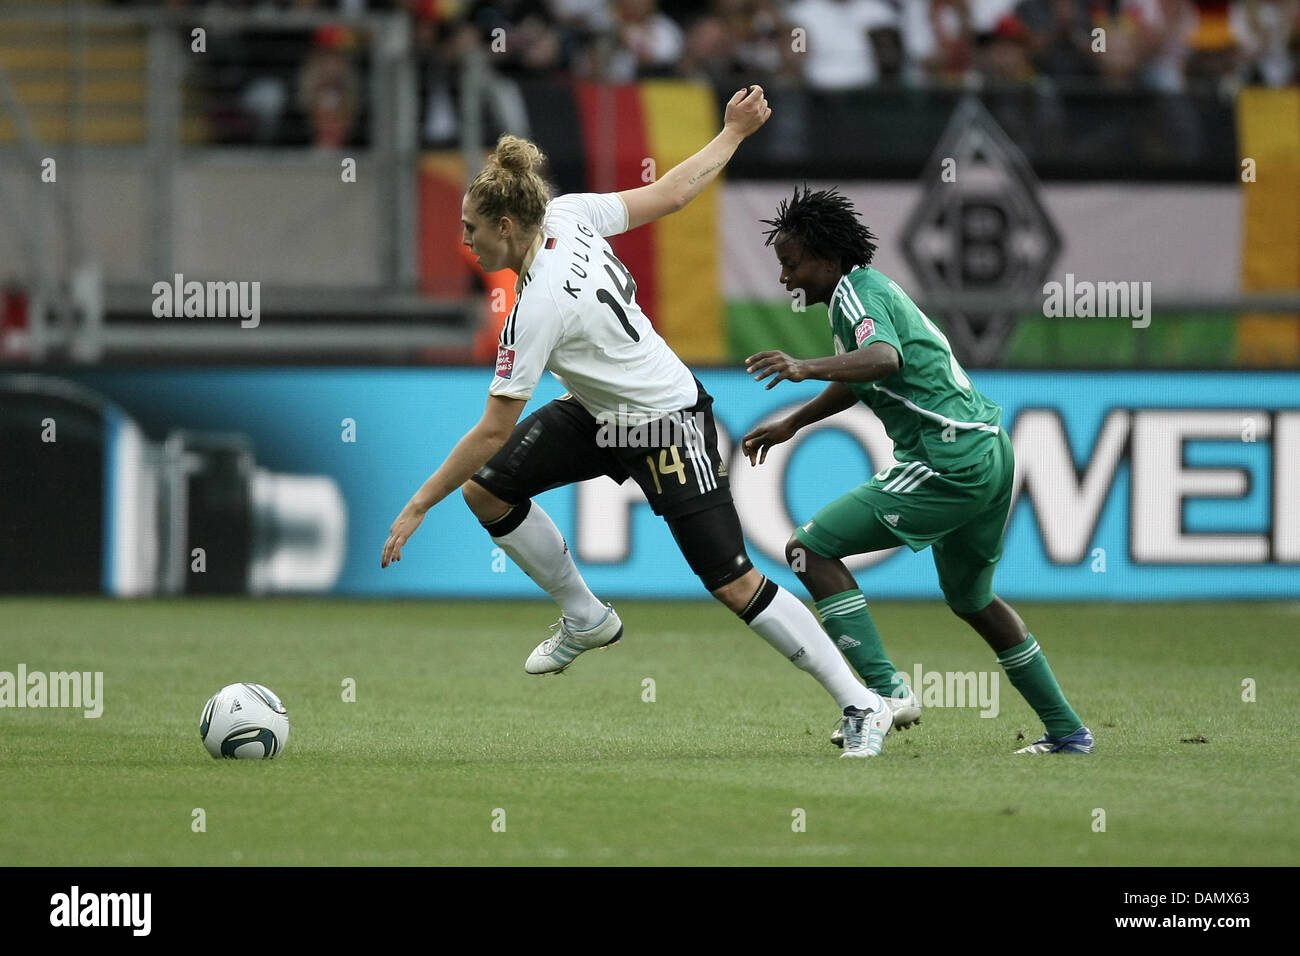 Kim Kulig (l) of Germany and Ebere Orji of Nigeria fight for the ball during the Group A match Germany against Nigeria of FIFA Women's World Cup soccer tournament at the FIFA Women's World Cup Stadium in Frankfurt, Germany, 30 June 2011. Foto: Fredrik von Erichsen dpa/lhe Stock Photo